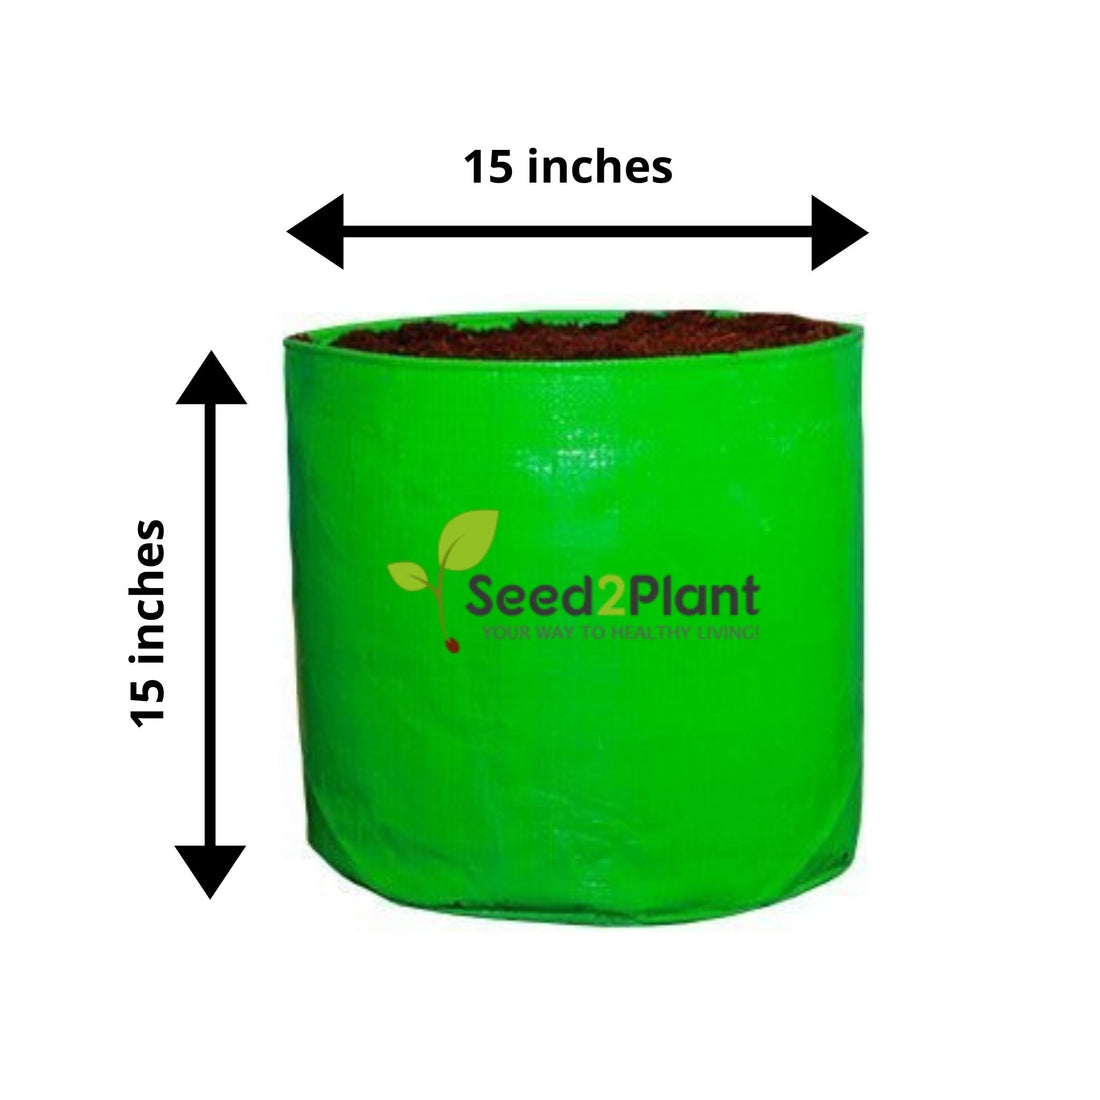 15x15 Inches (1¼x1¼ Ft) (Pack of 4) - 220 GSM HDPE Round Grow Bag